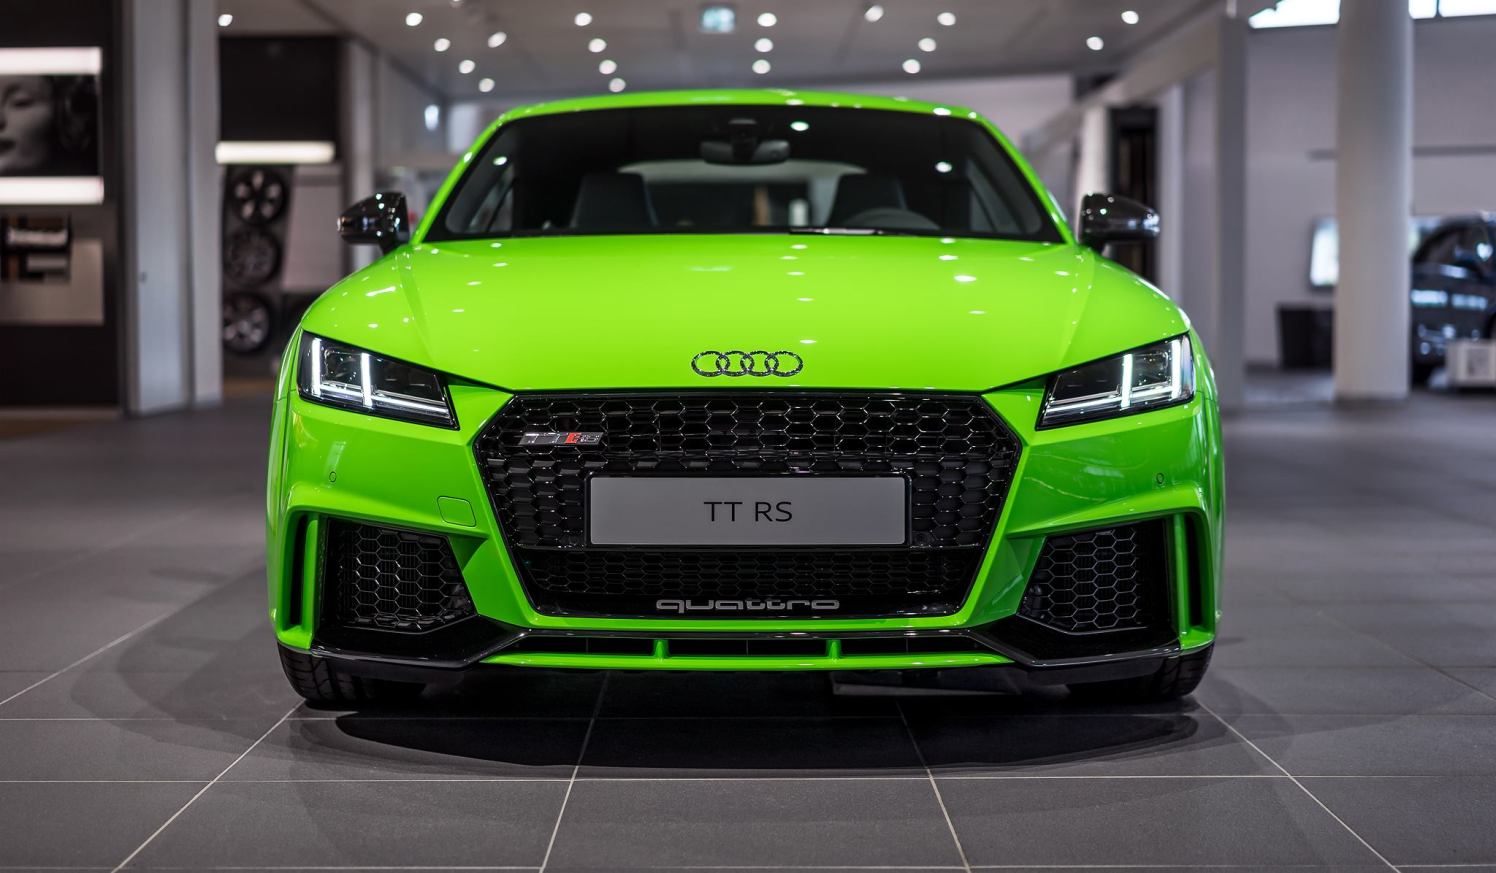 2017-audi-tt-rs-in-lime-green-looks-like-a-tiny-exotic-car_12.jpg